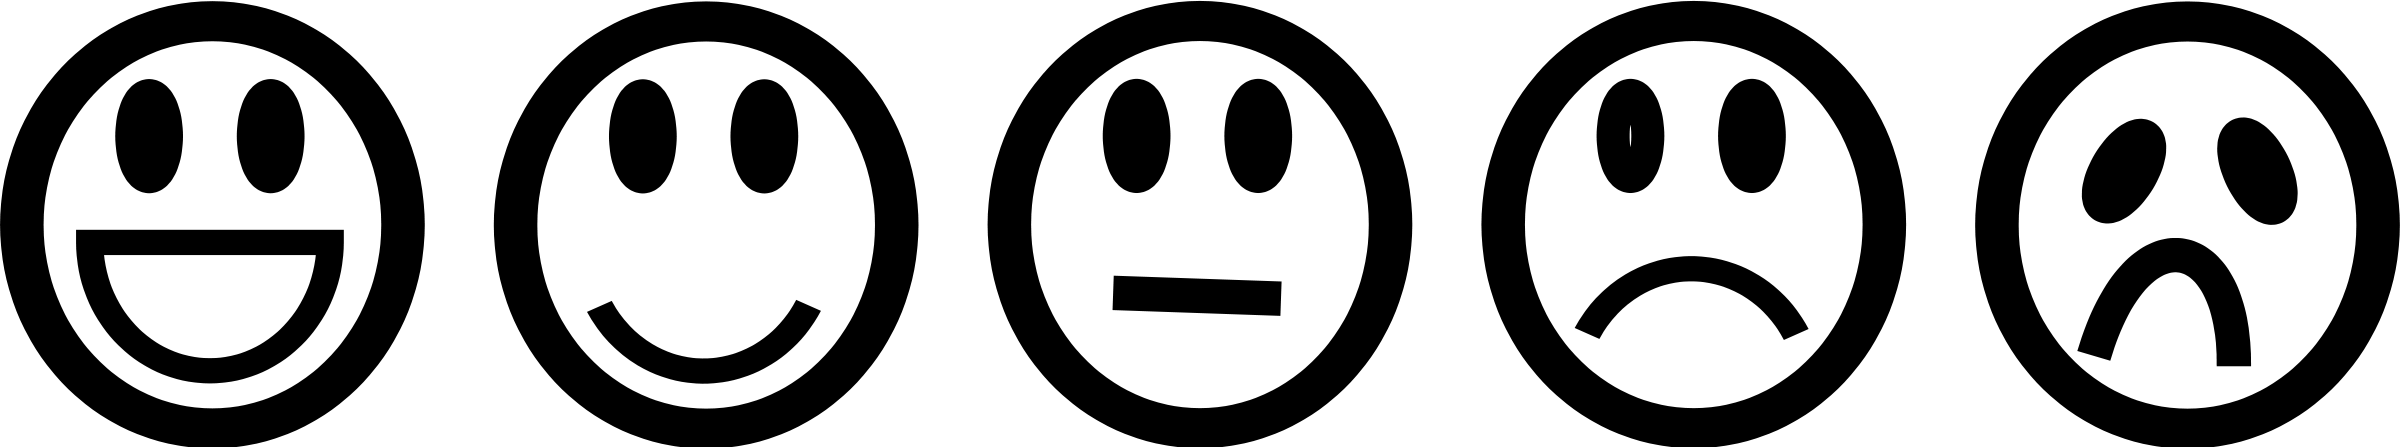 Smiley Black And White - ClipArt Best